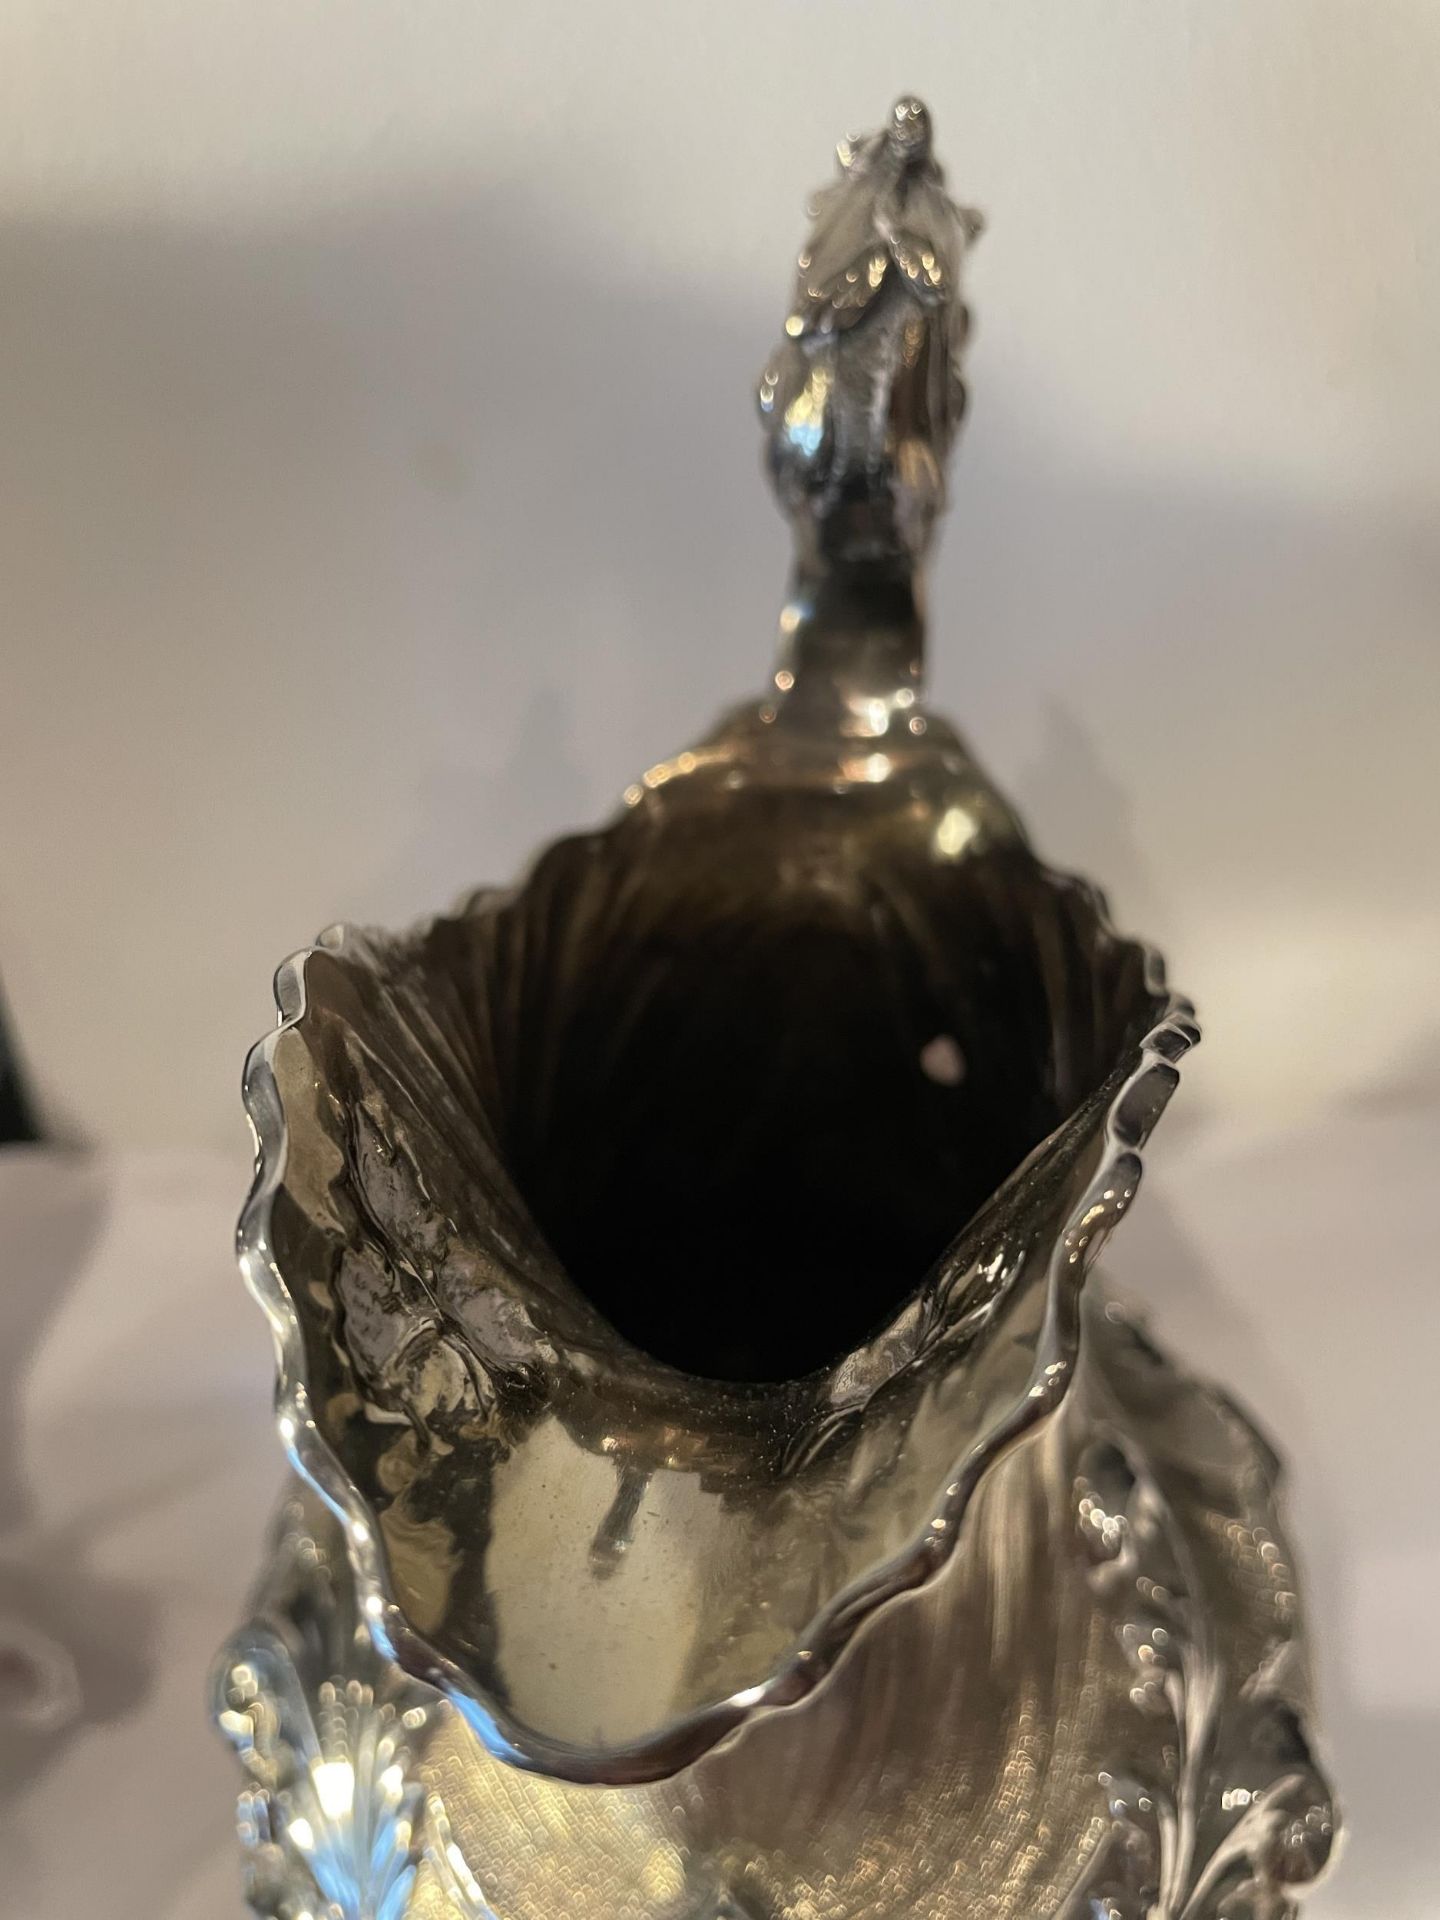 AN ORNATE 1830 HALLMARKED LONDON SILVER CLARET JUG, MAKER CHARLES FOX II GROSS WEIGHT 878 GRAMS - Image 12 of 18